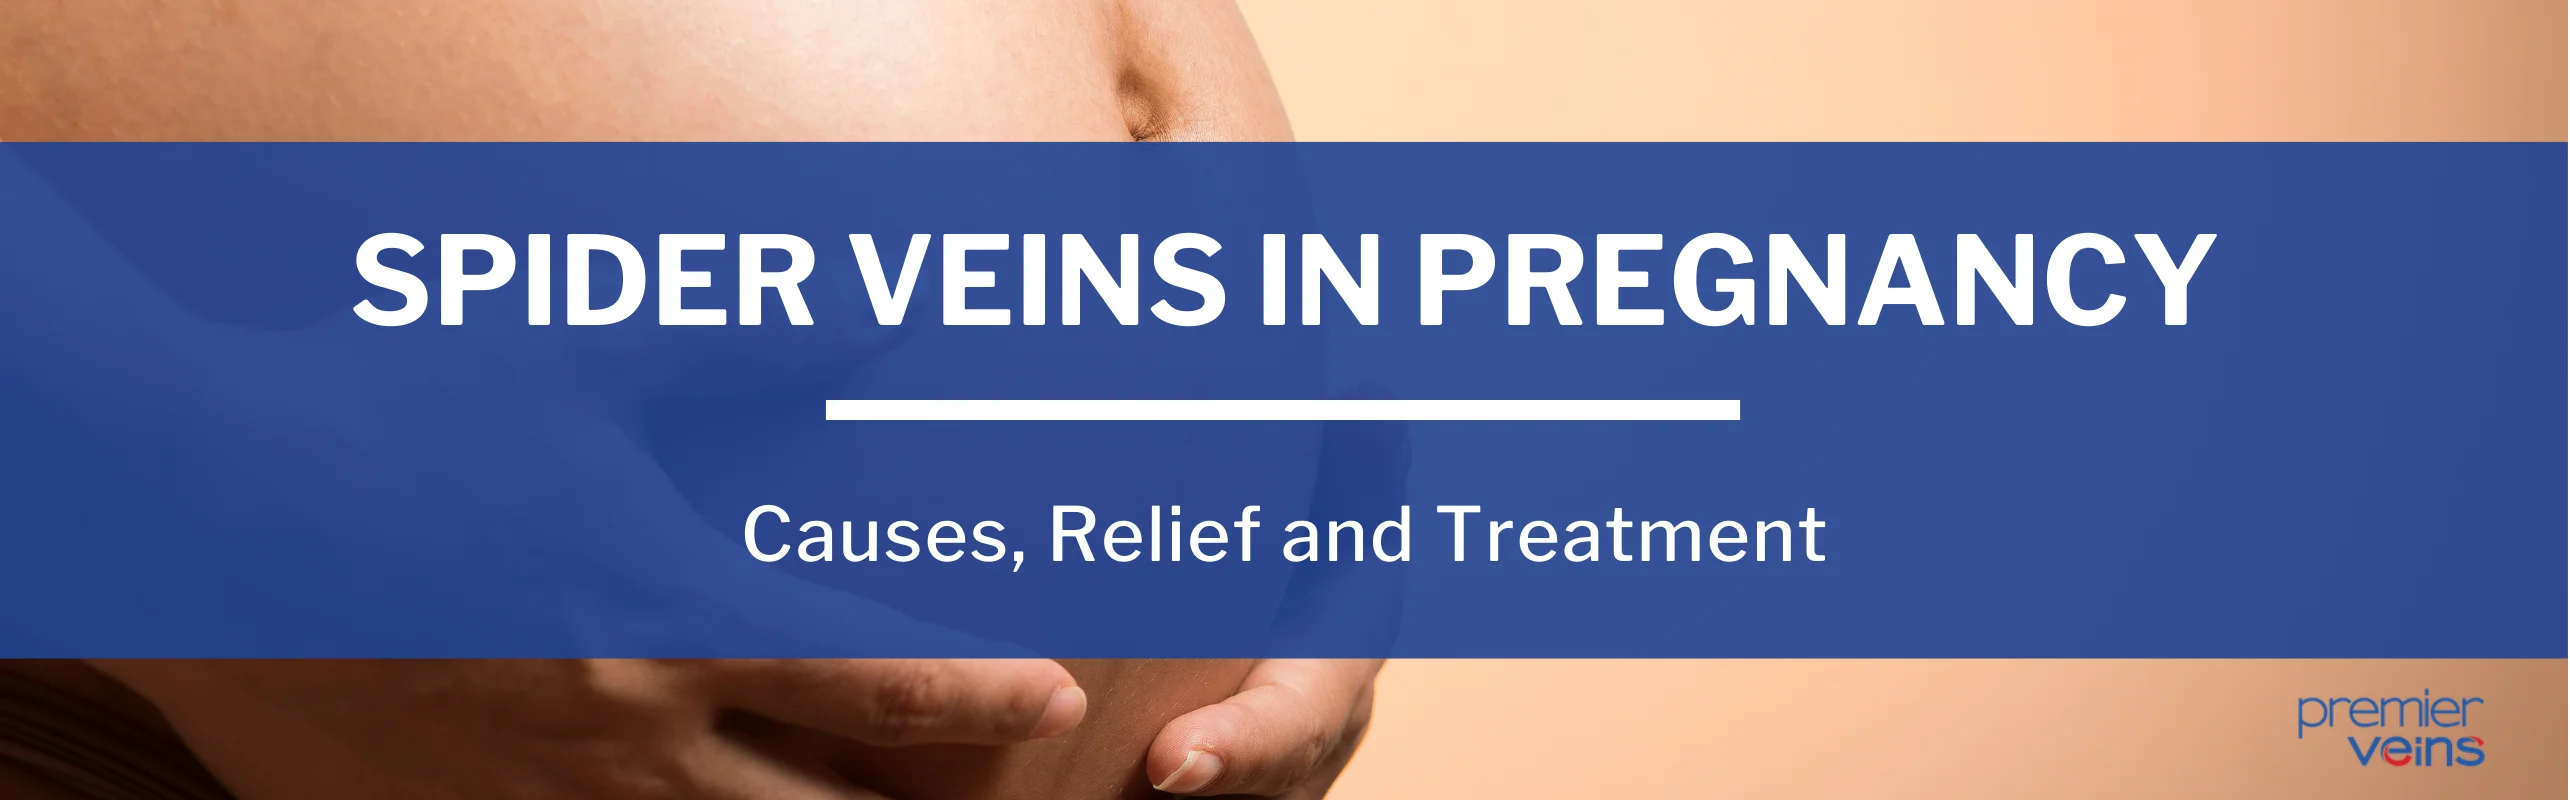 A guide to spider veins in pregnancy